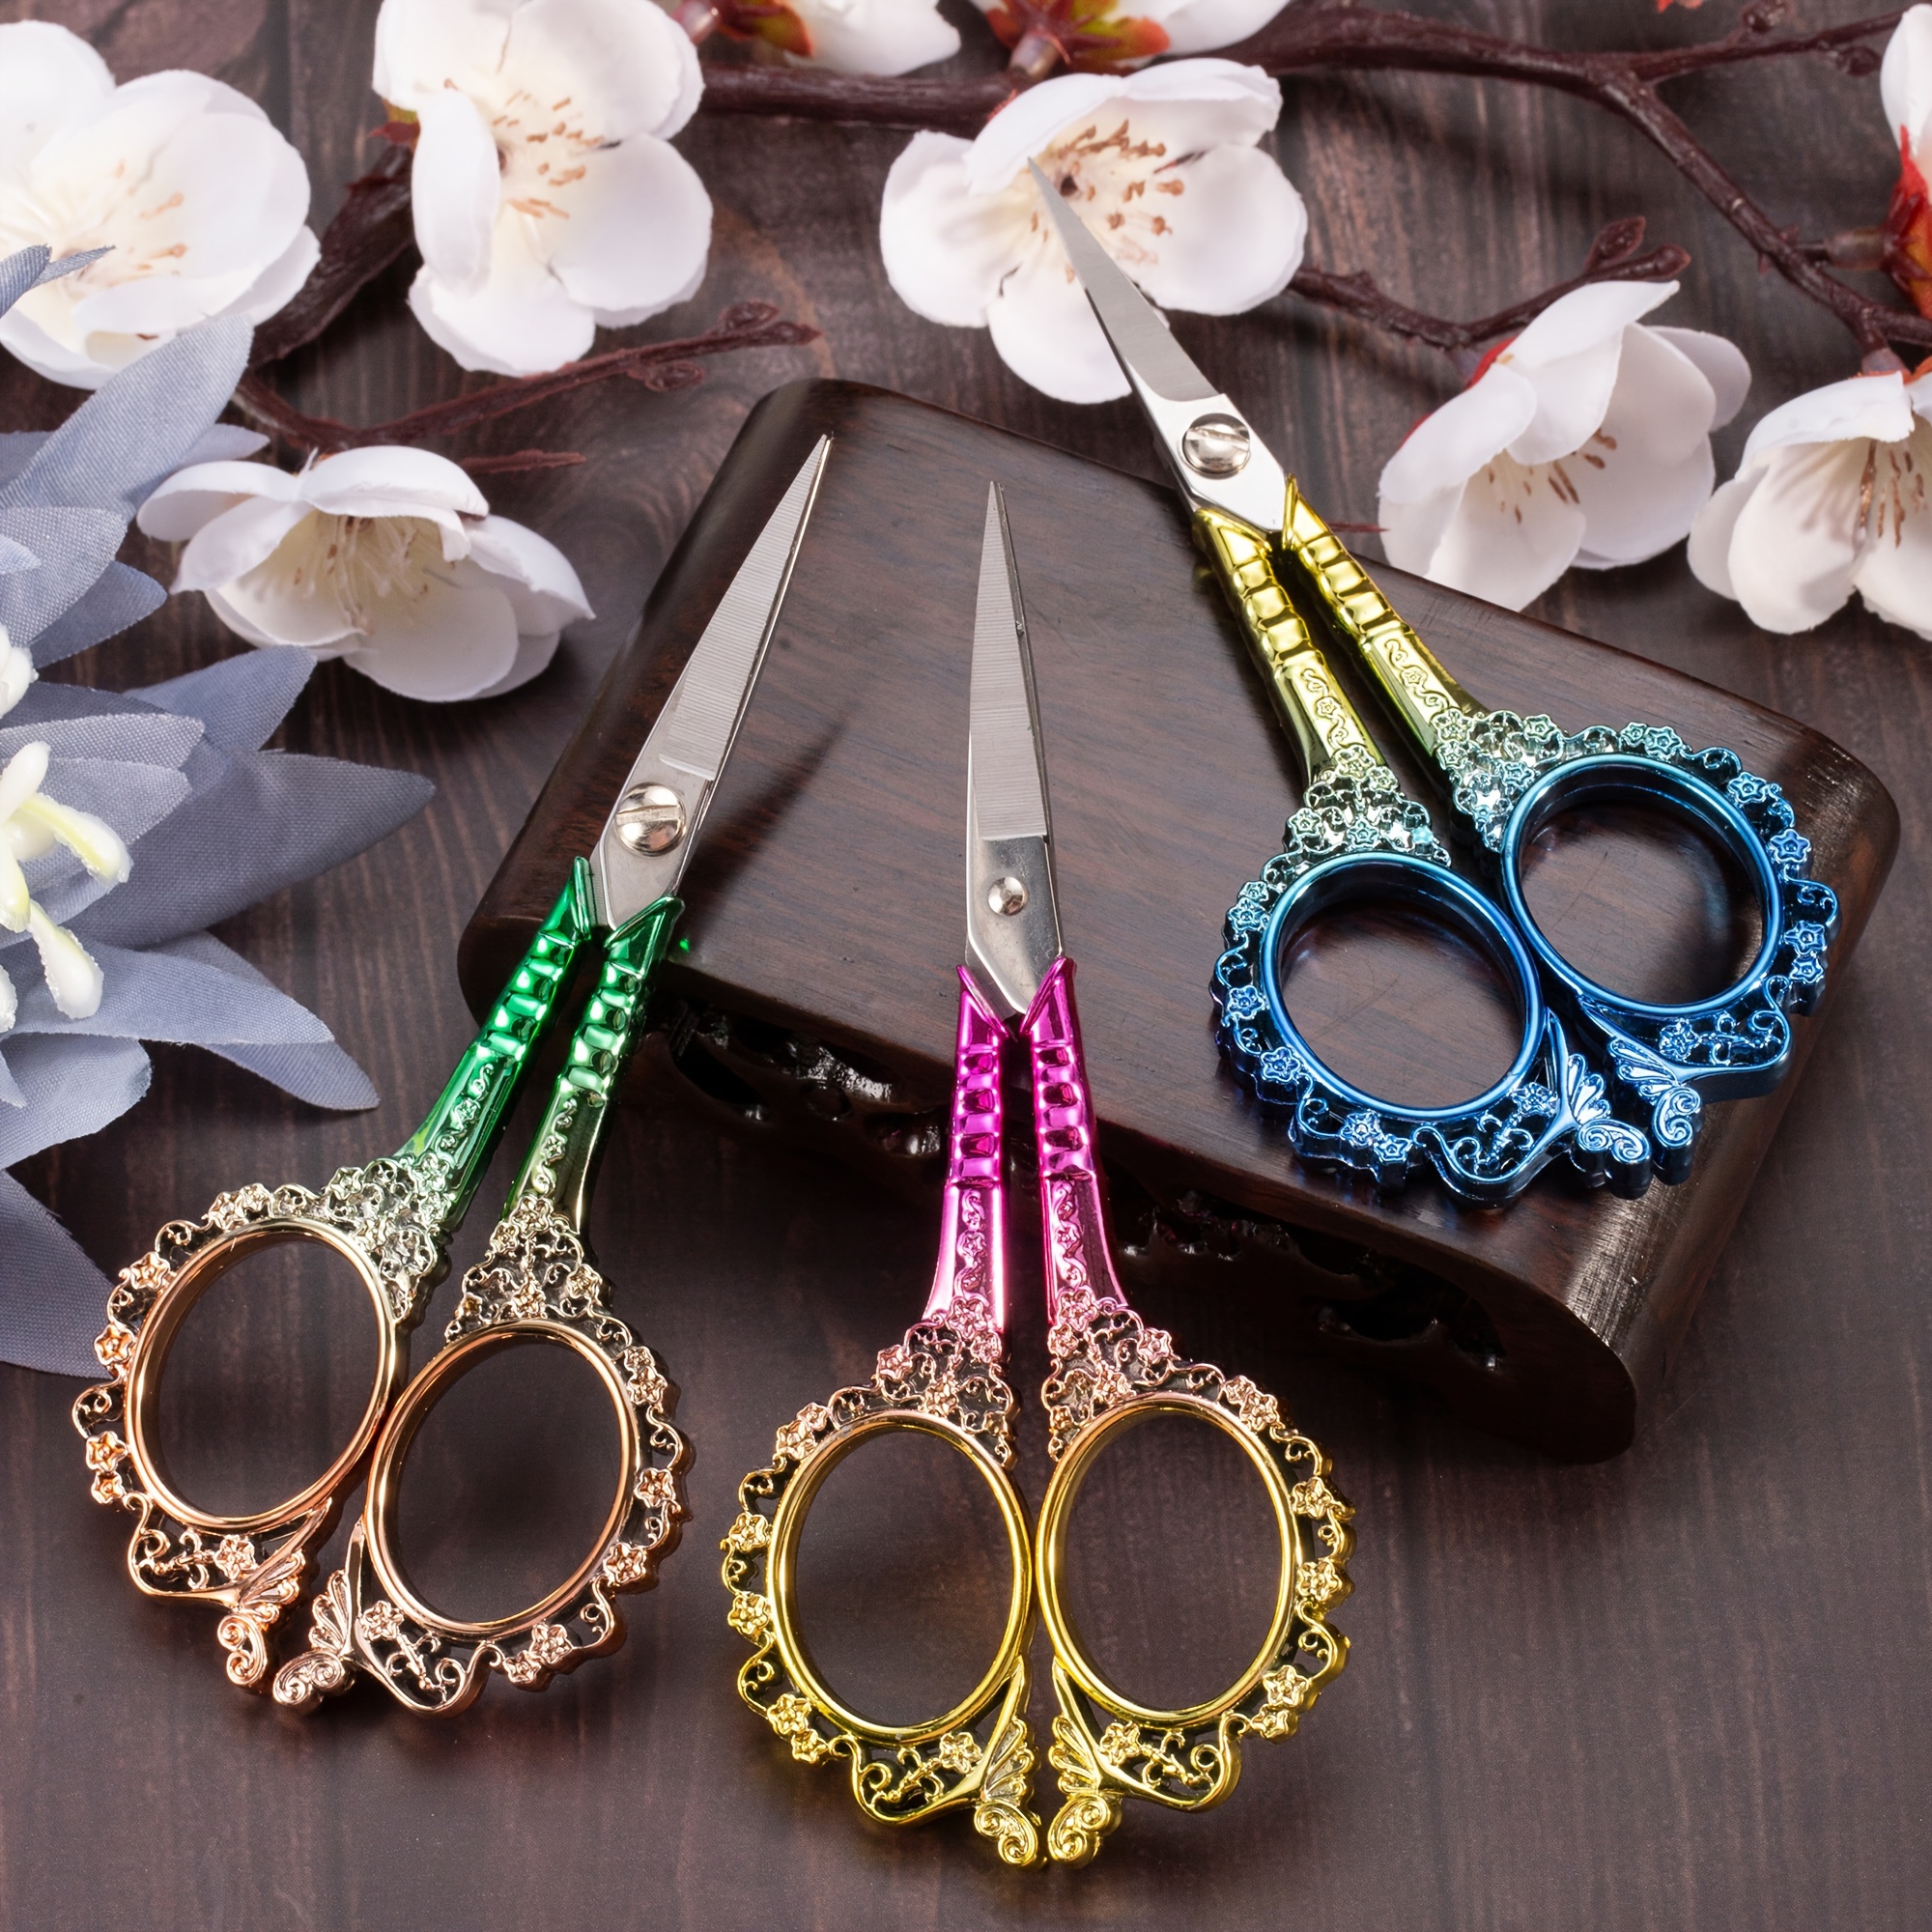 

Vintage Embroidery Scissors, Stainless Steel Scissors, Petal Style Eyebrow And Eyelash Trimmers, Ideal For Crafts, Art, Needlework, Diy Tools, Fabric Cutting, Latest Design With Assorted Colors